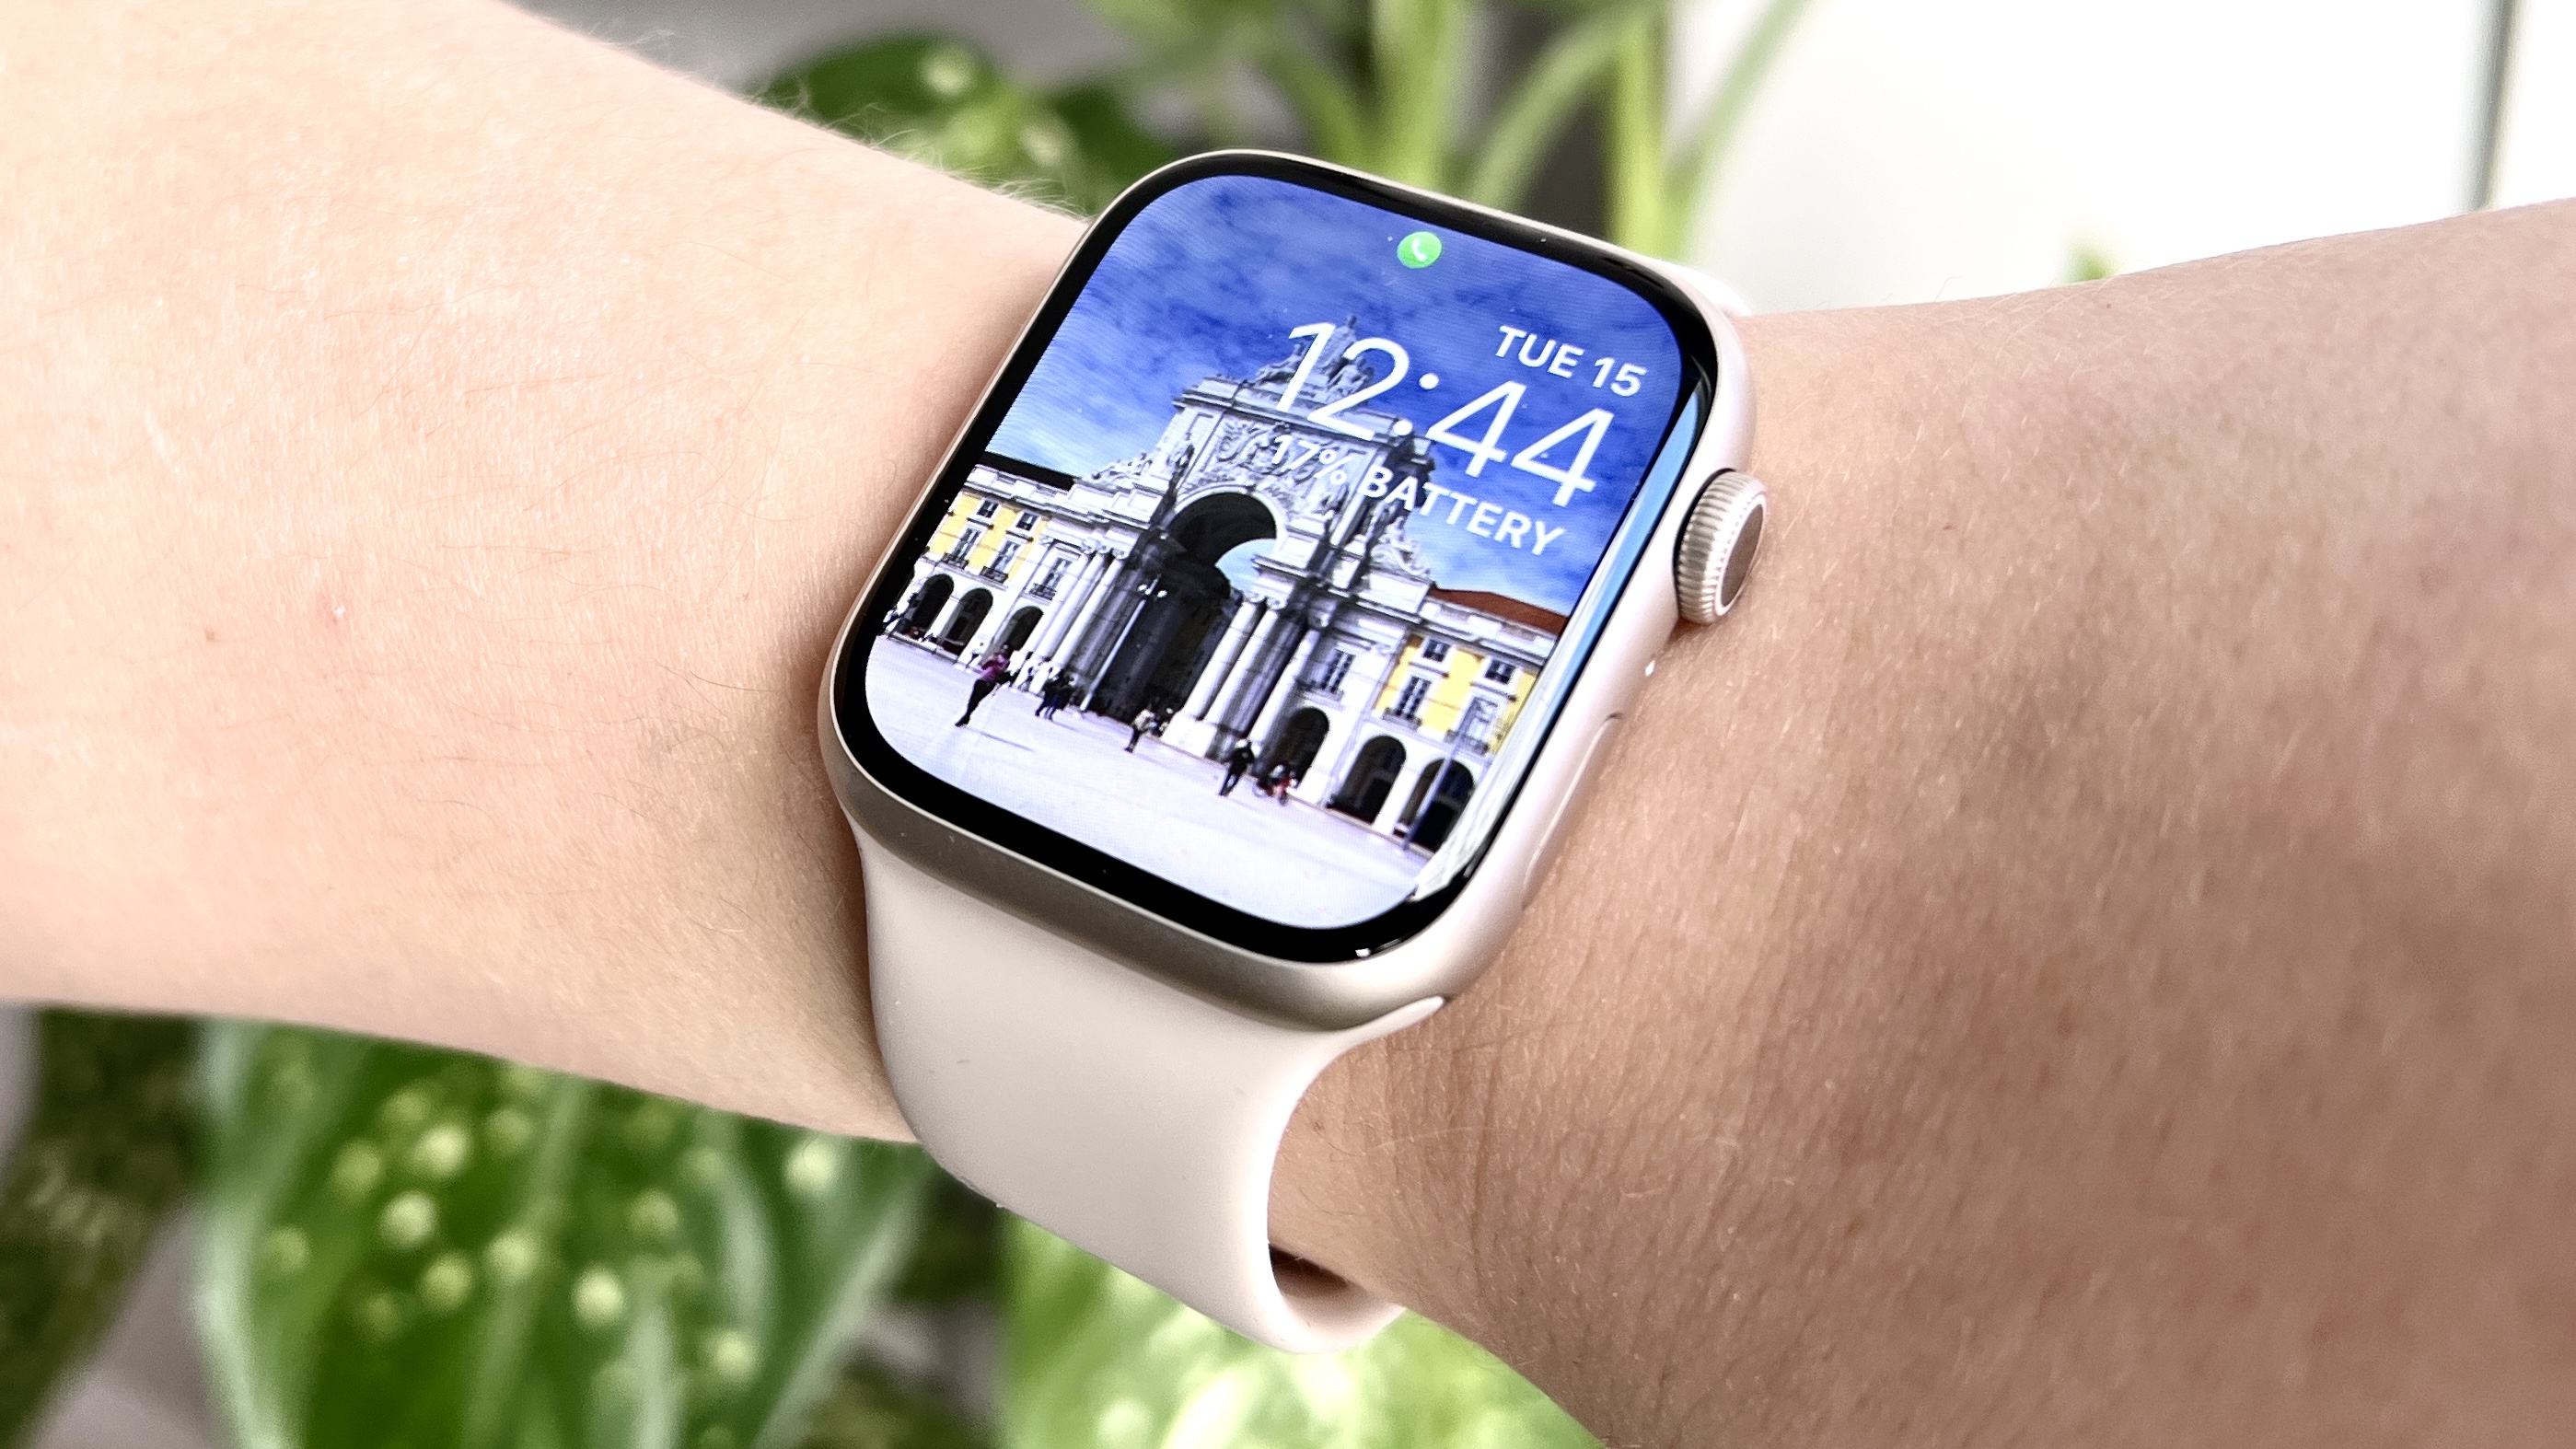 How to use a photo as an Apple Watch face